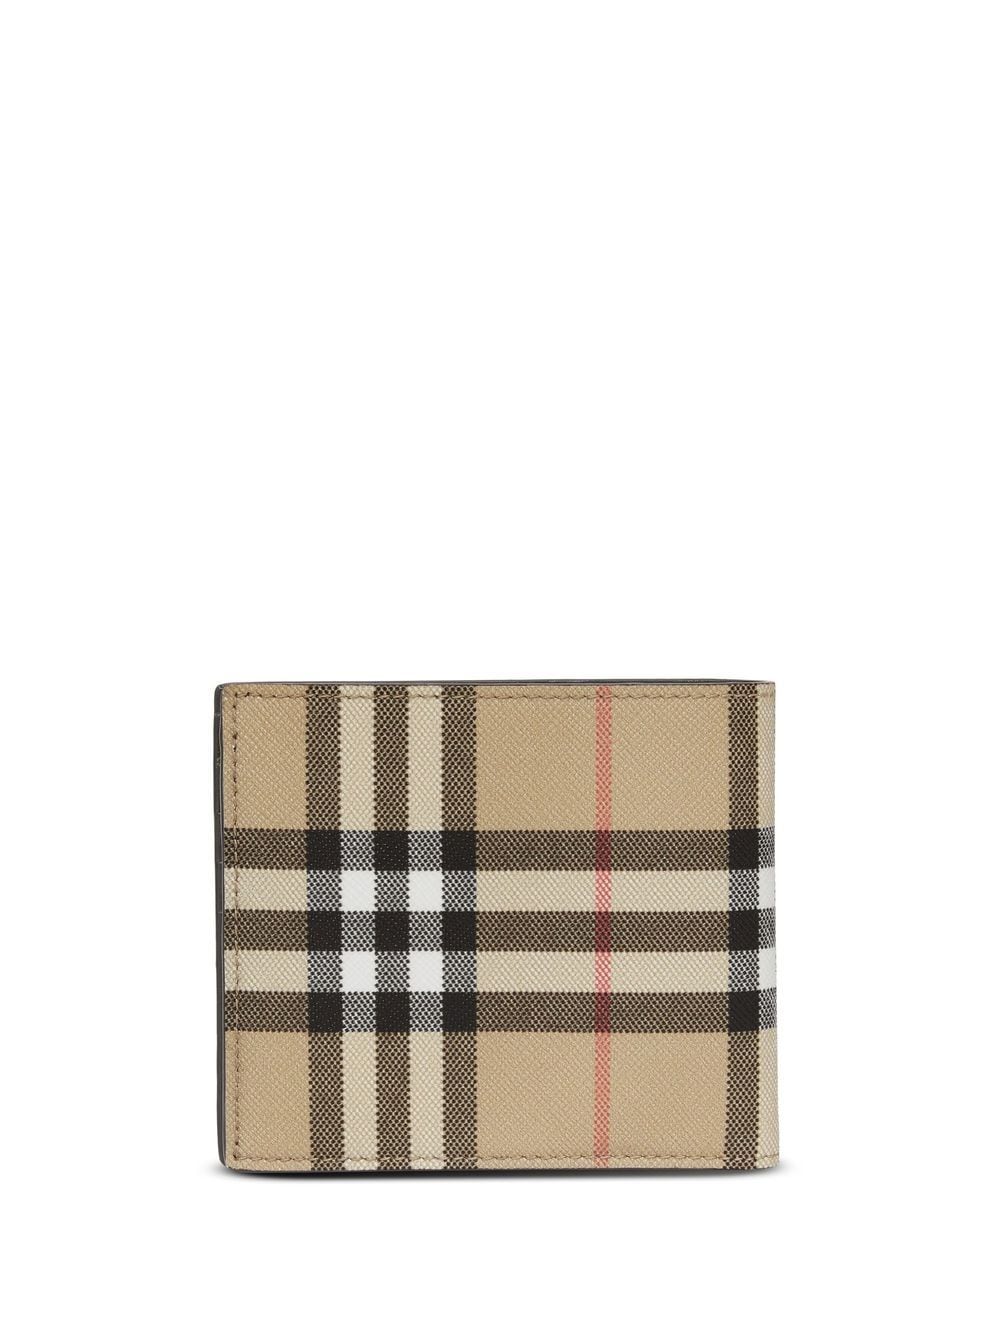 How to Spot Fake Burberry Mens Wallet 